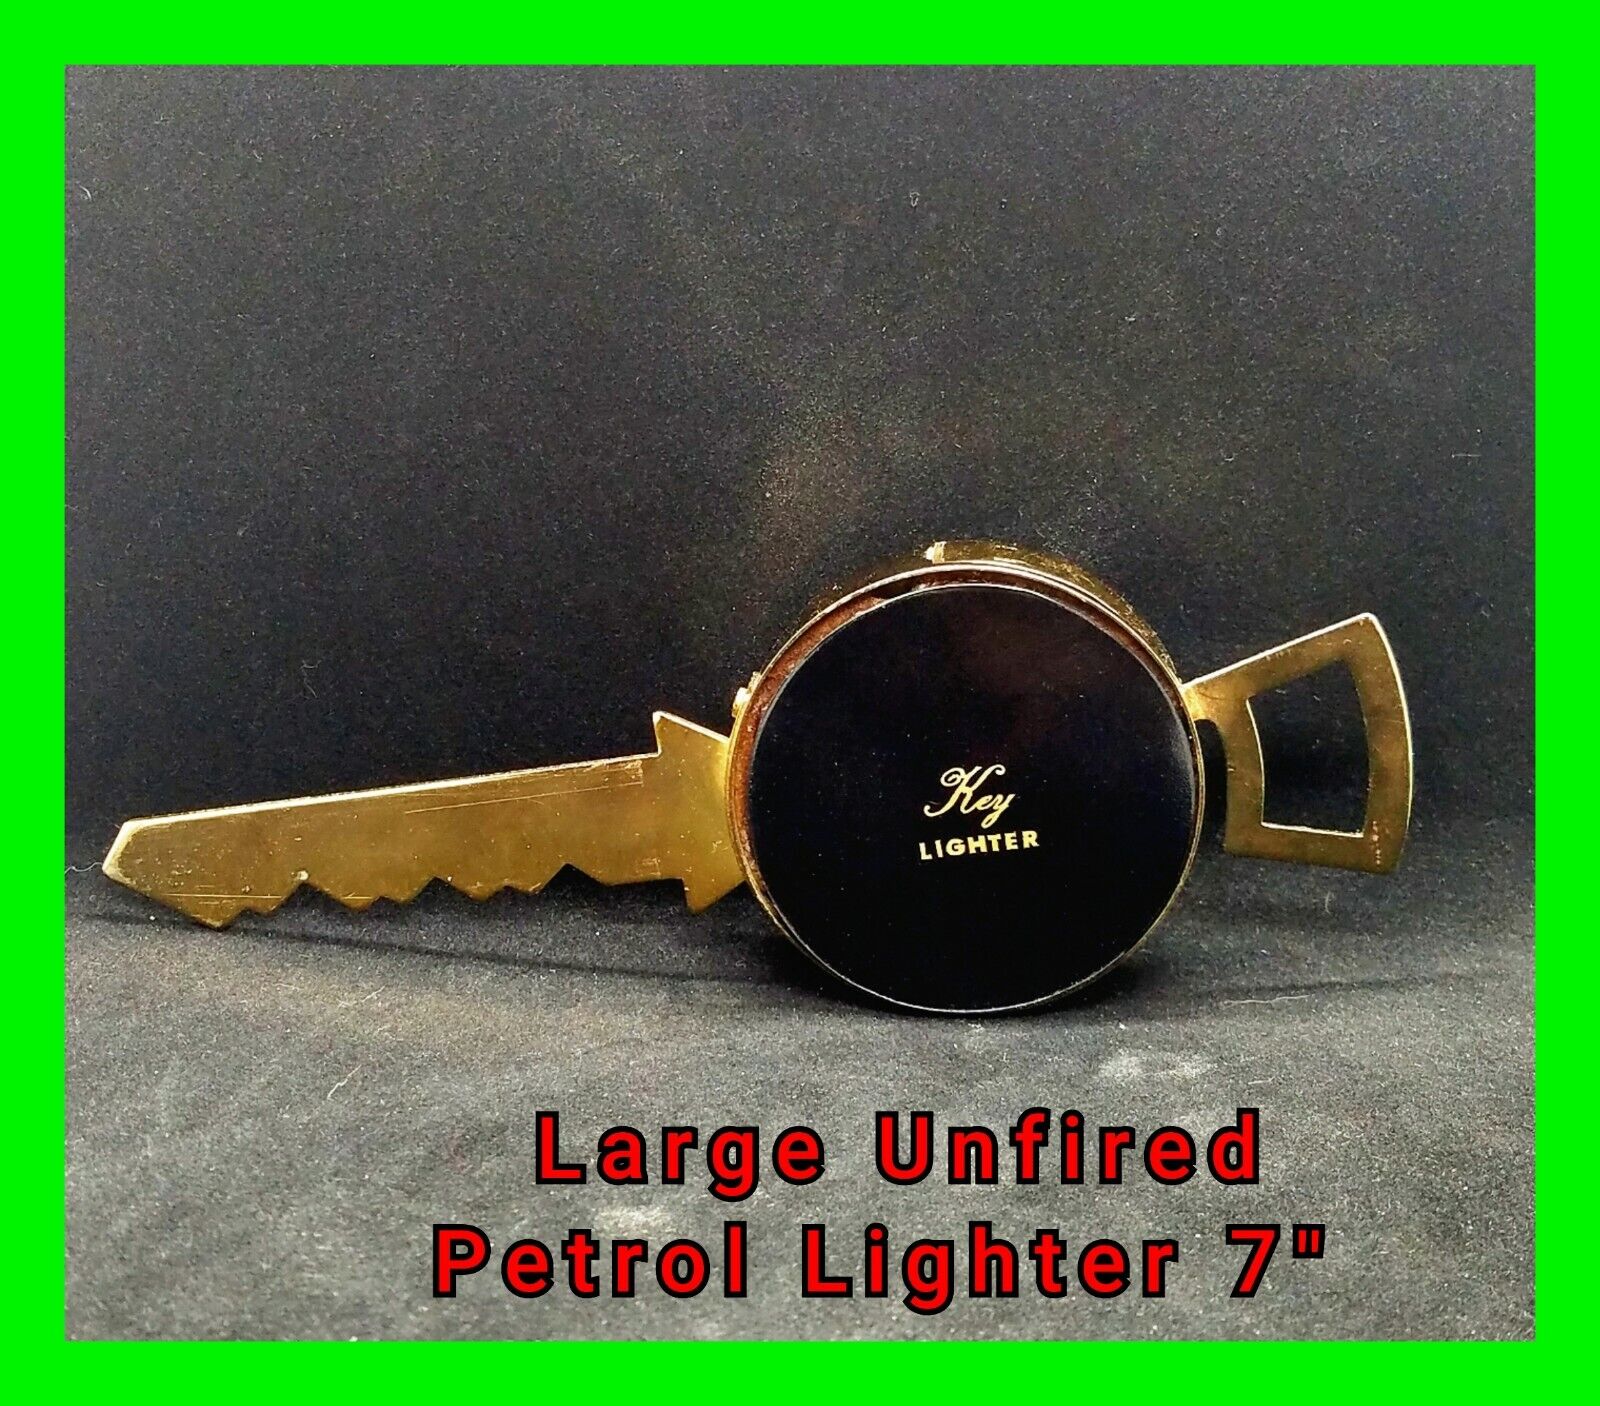 Uncommon Unique Vintage Large 7” Key Petrol Table Lighter Hard To Find - UNFIRED